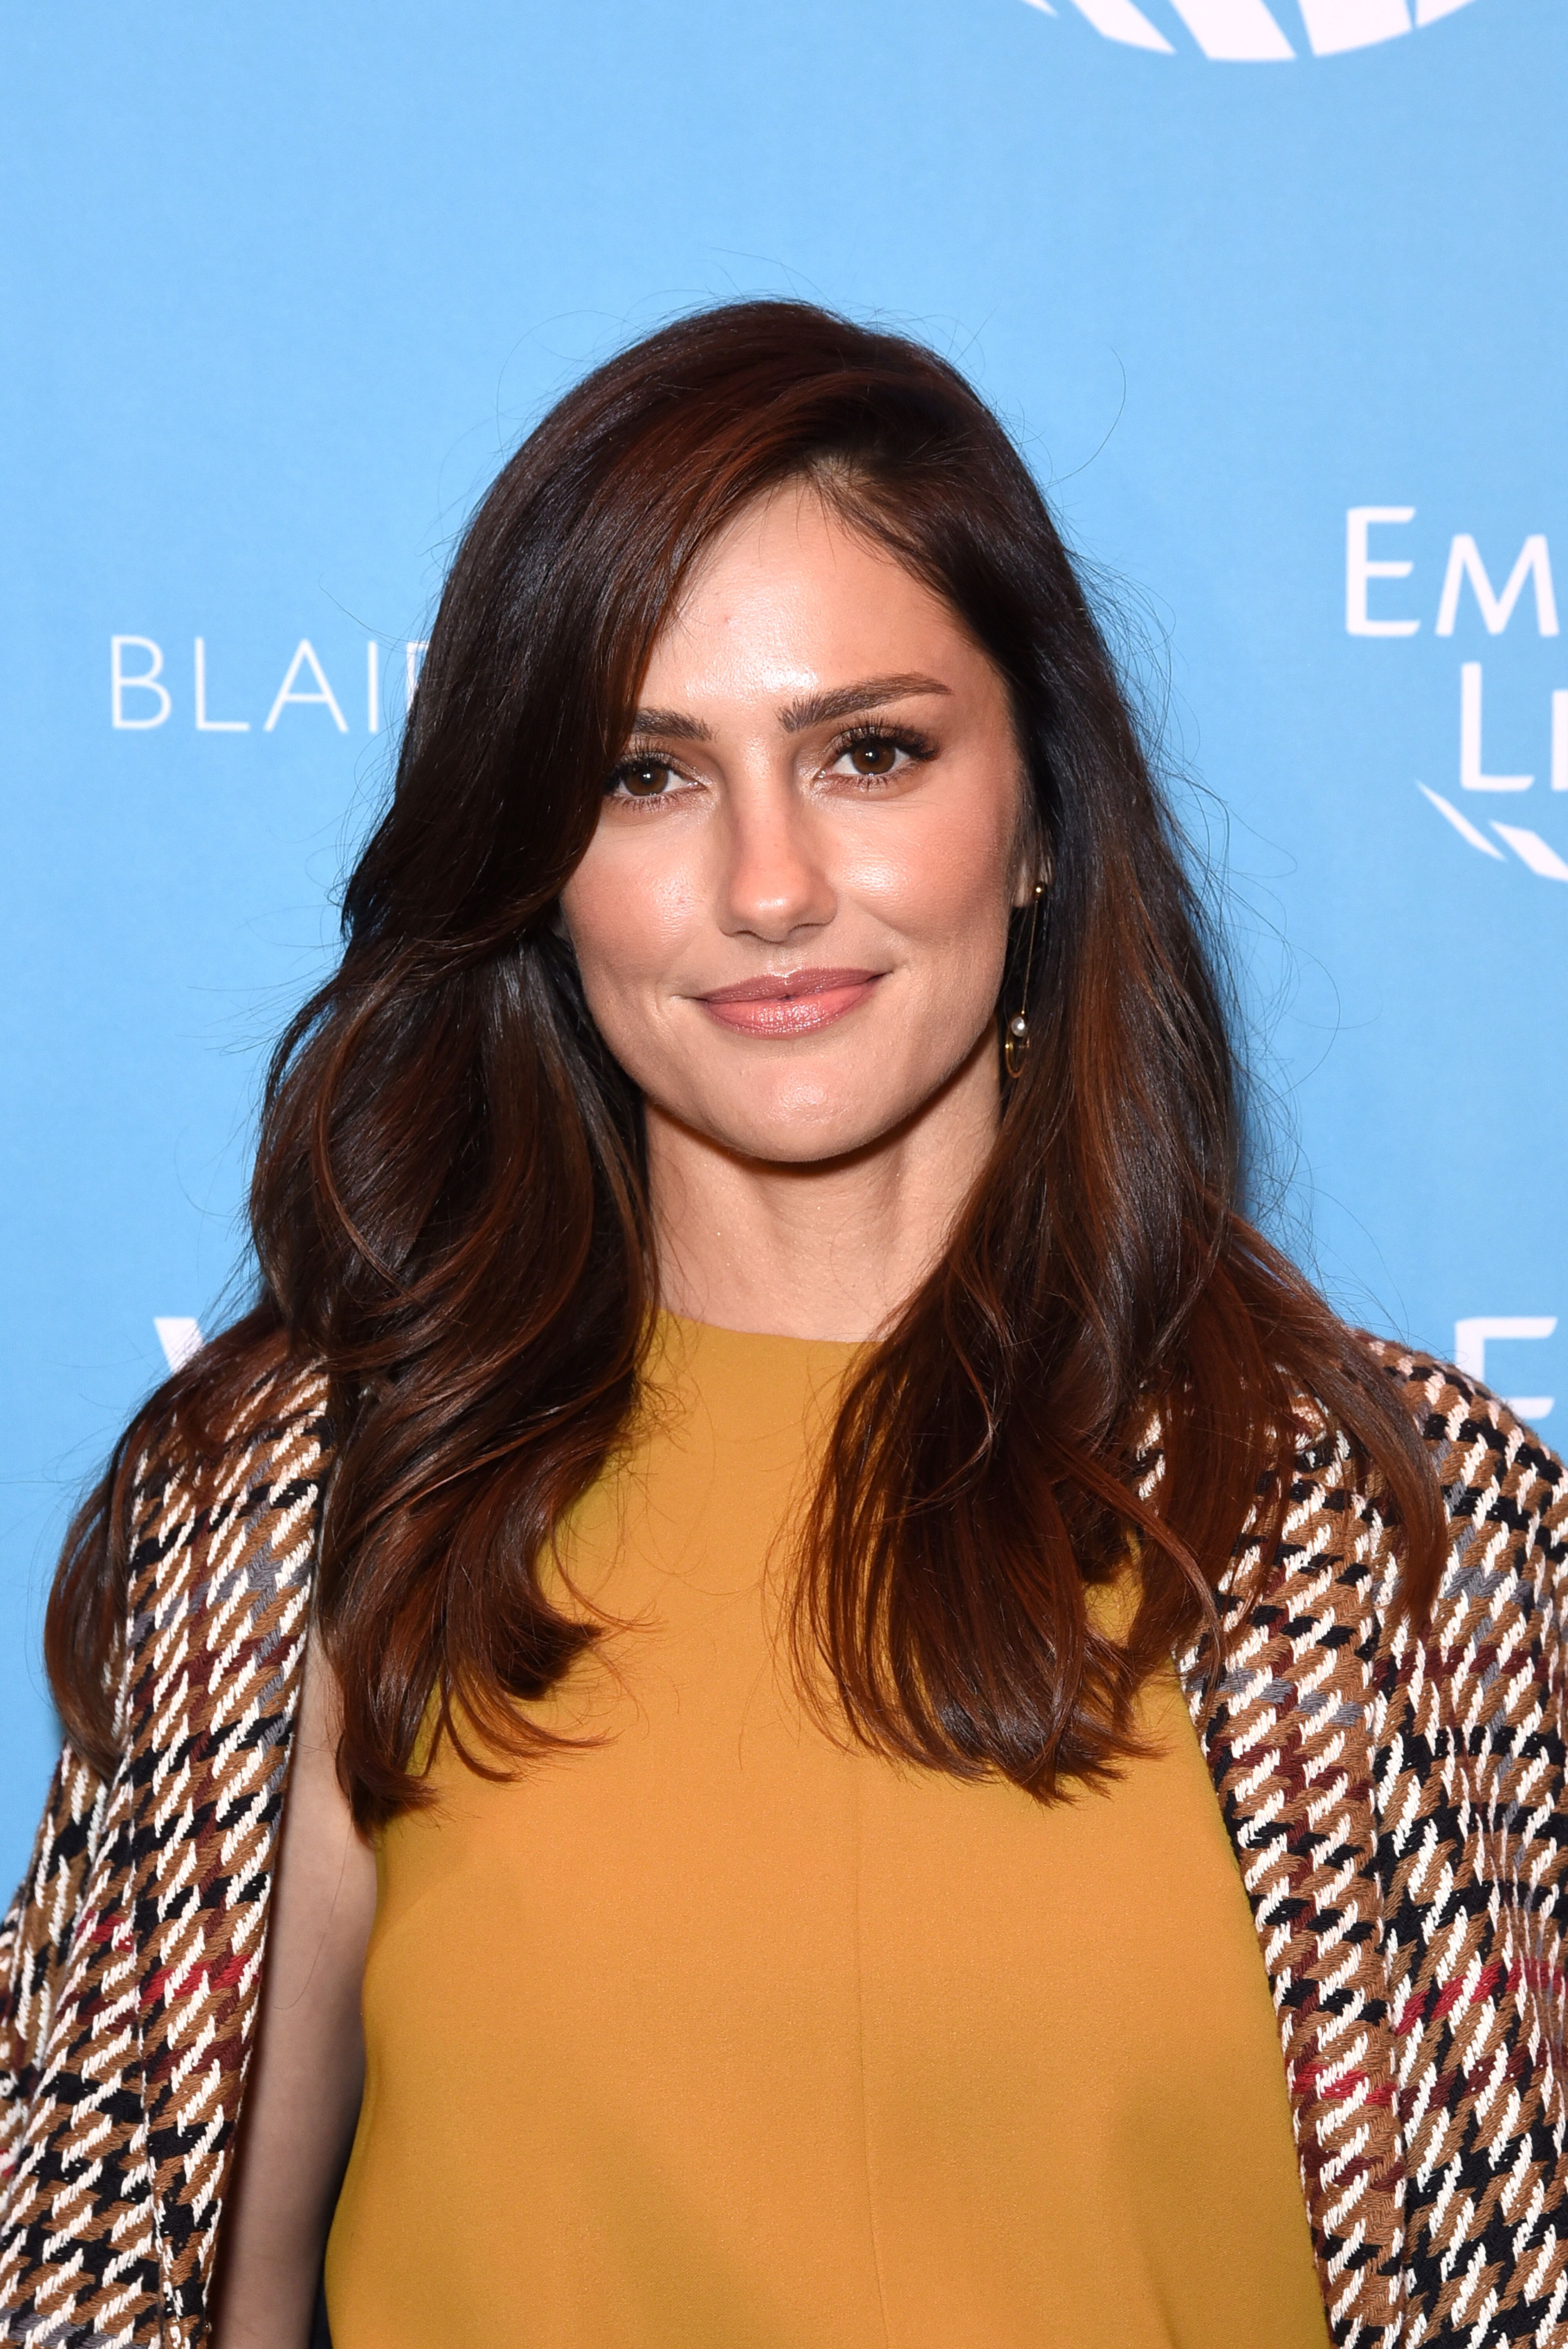 Minka Kelly attends Raising Our Voices: Supporting More Women in Hollywood & Politics. | Source: Getty Images